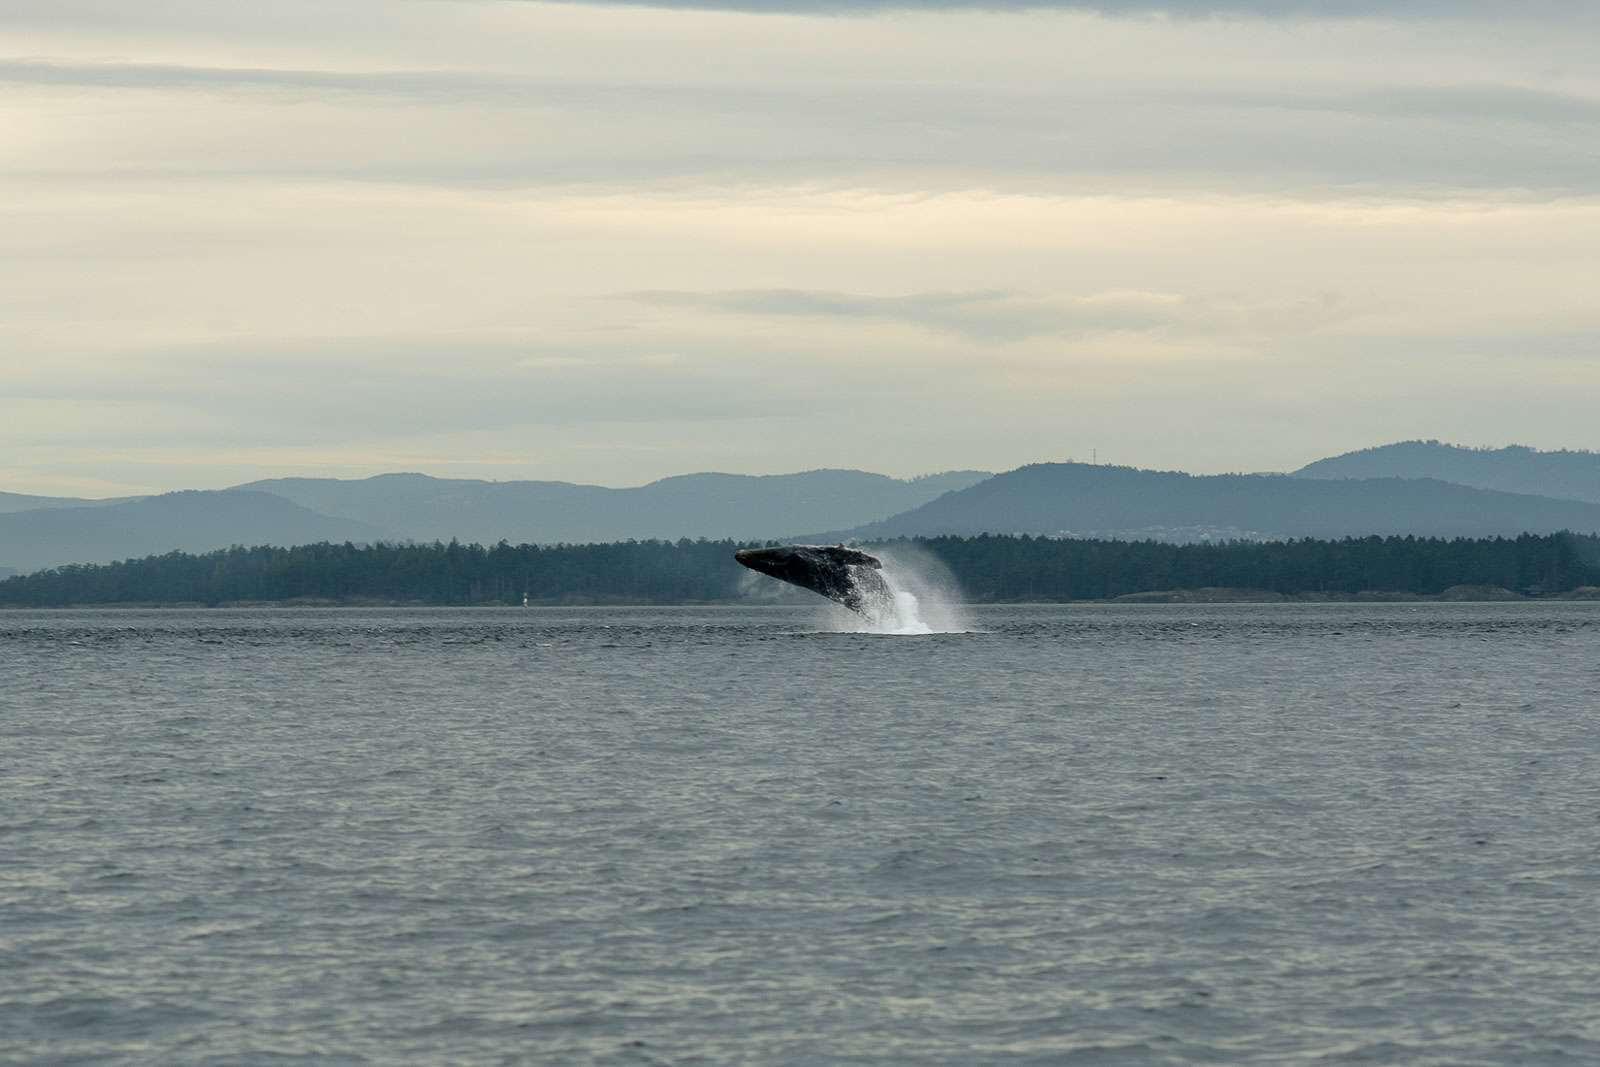 A humpback whale breaches in the waters of the Salish Sea